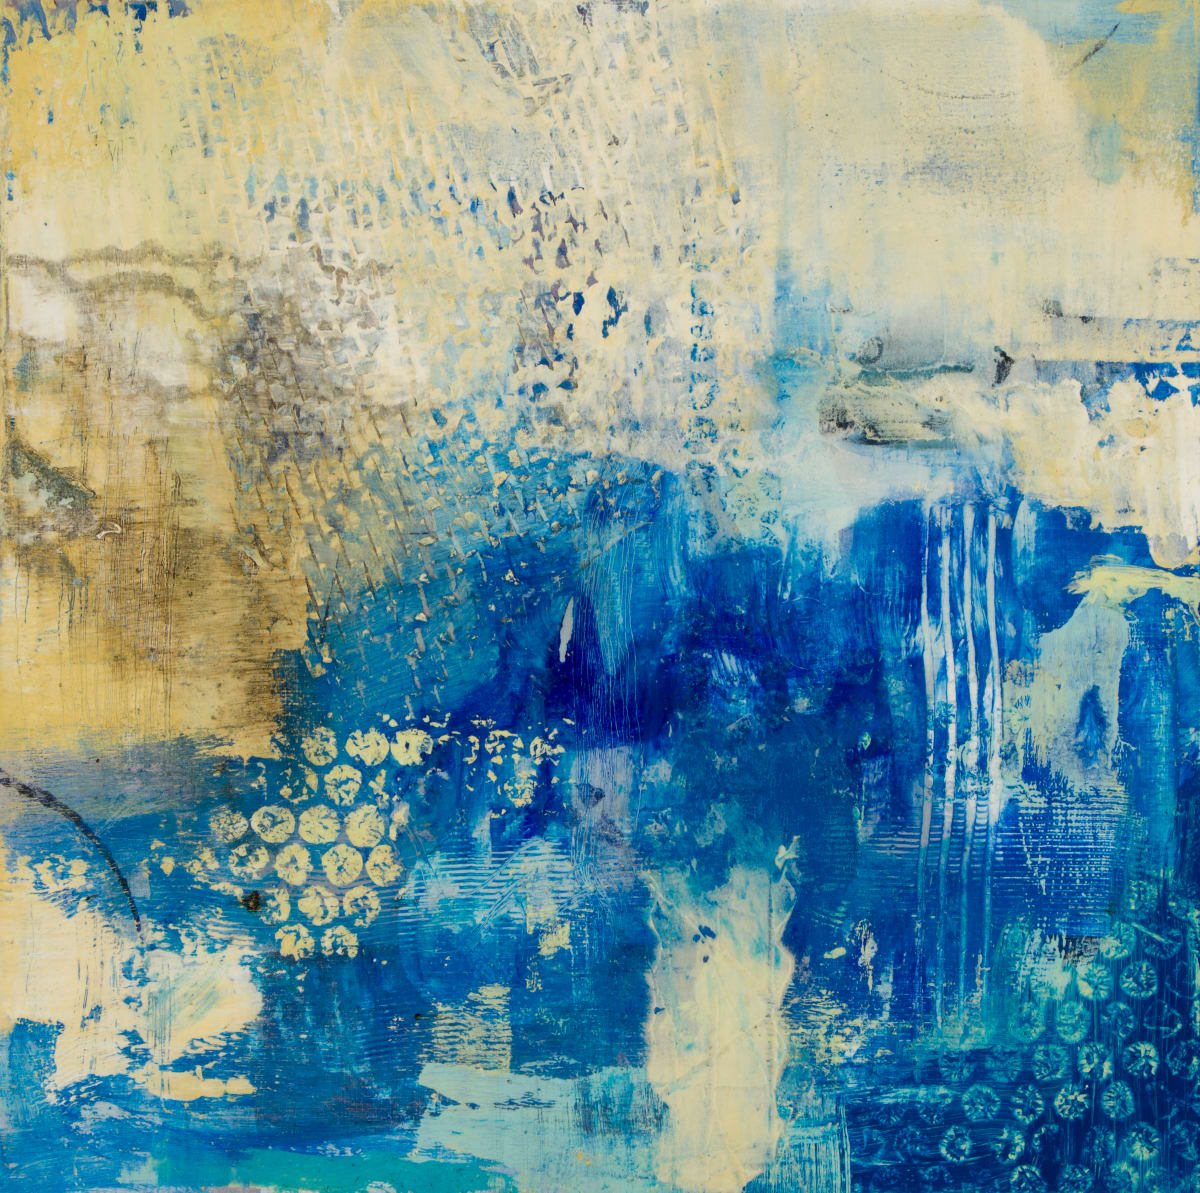 Abstract Blue by Kristin Murphy  Image: Adrift, mixed media painting